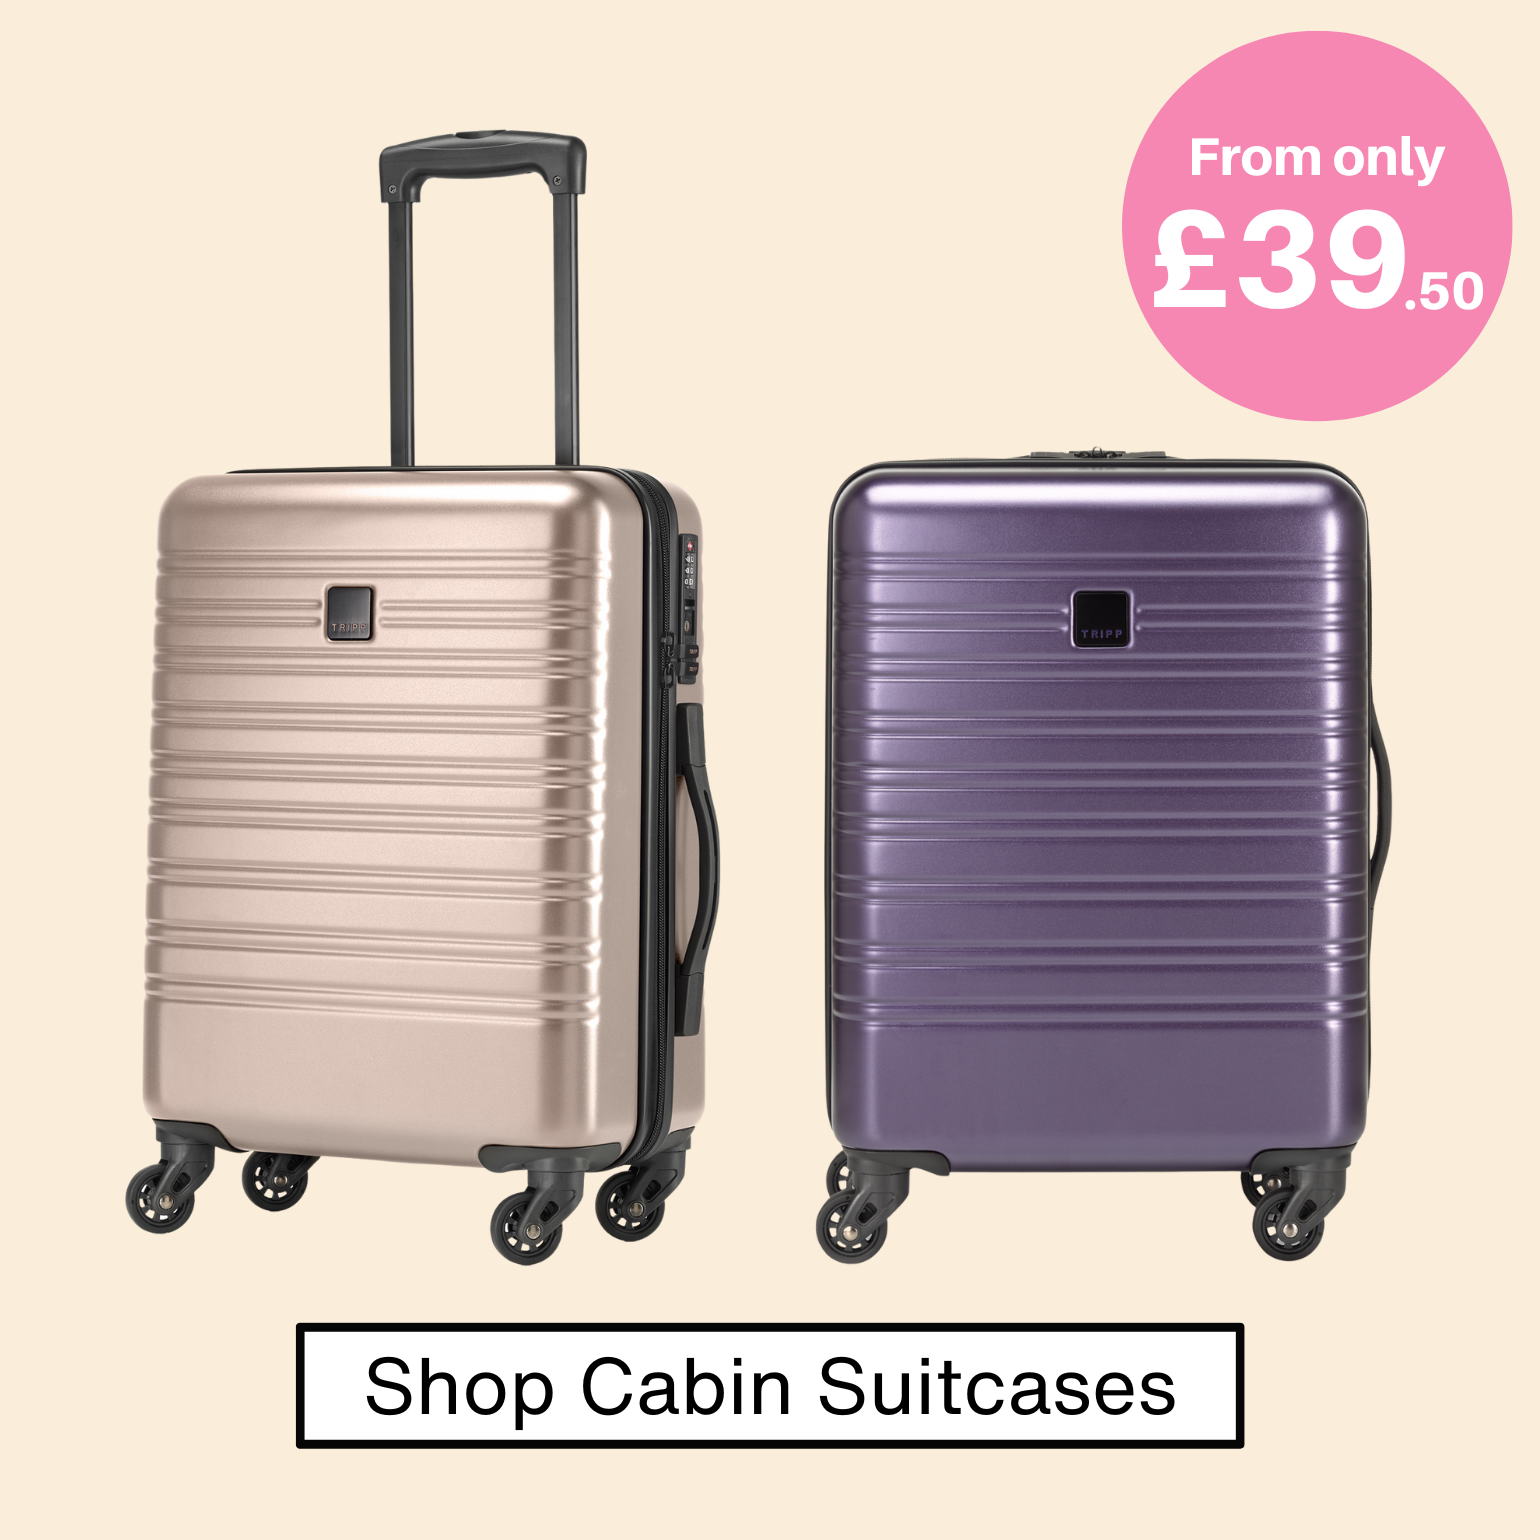 County Mall Shopping Centre - Debenhams Crawley | Tripp Luggage Superlite –  Half Price offer A lightweight smart suitcase, with added expandability,  Tripp Superlite is perfect for that winter escape! Shop #now -